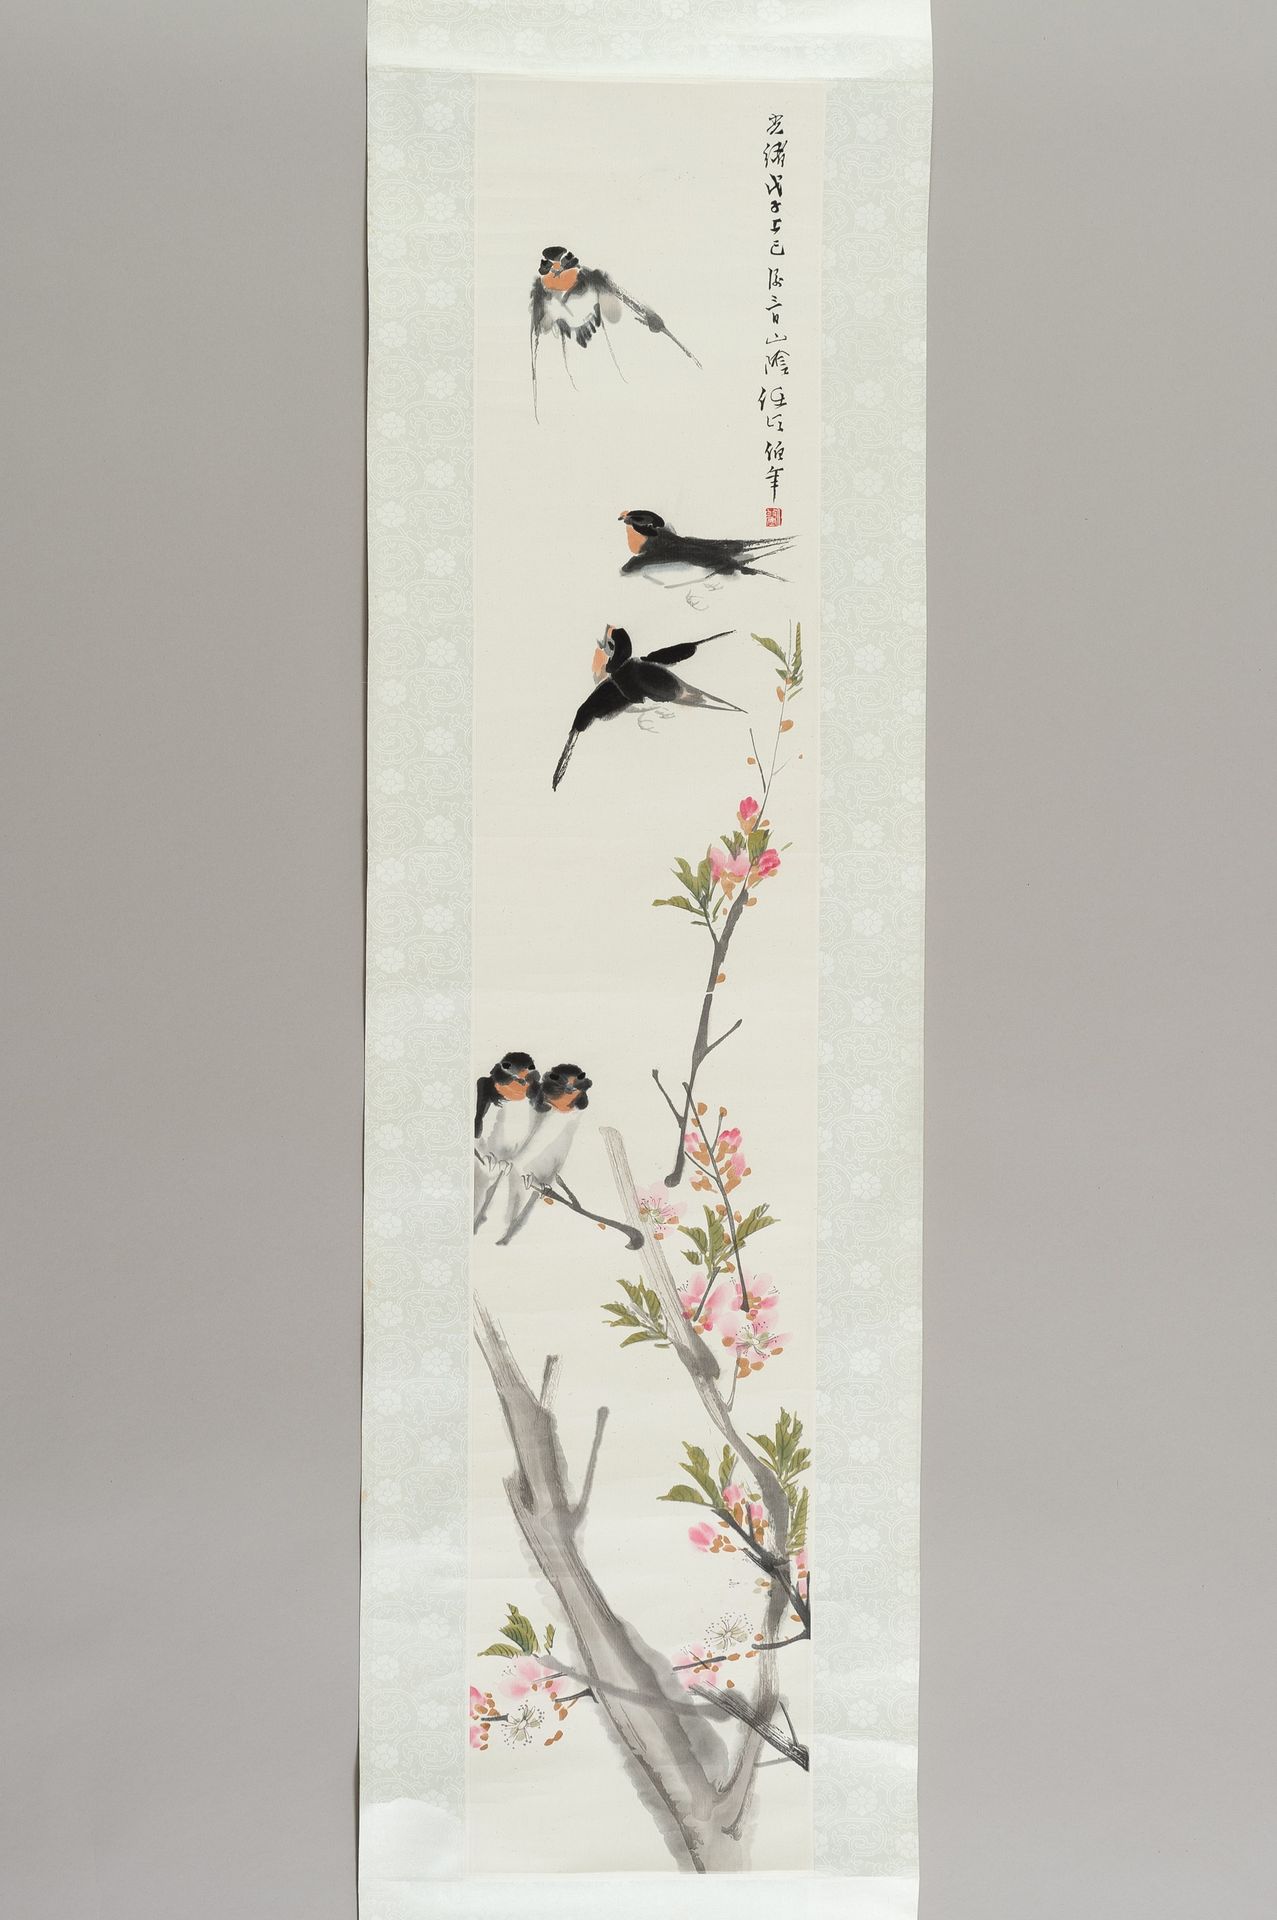 A SCROLL OF SWALLOWS AND CHERRY BLOSSOMS, AFTER REN BONIAN 燕子和樱桃花的卷轴，在任伯年之后
中国，2&hellip;